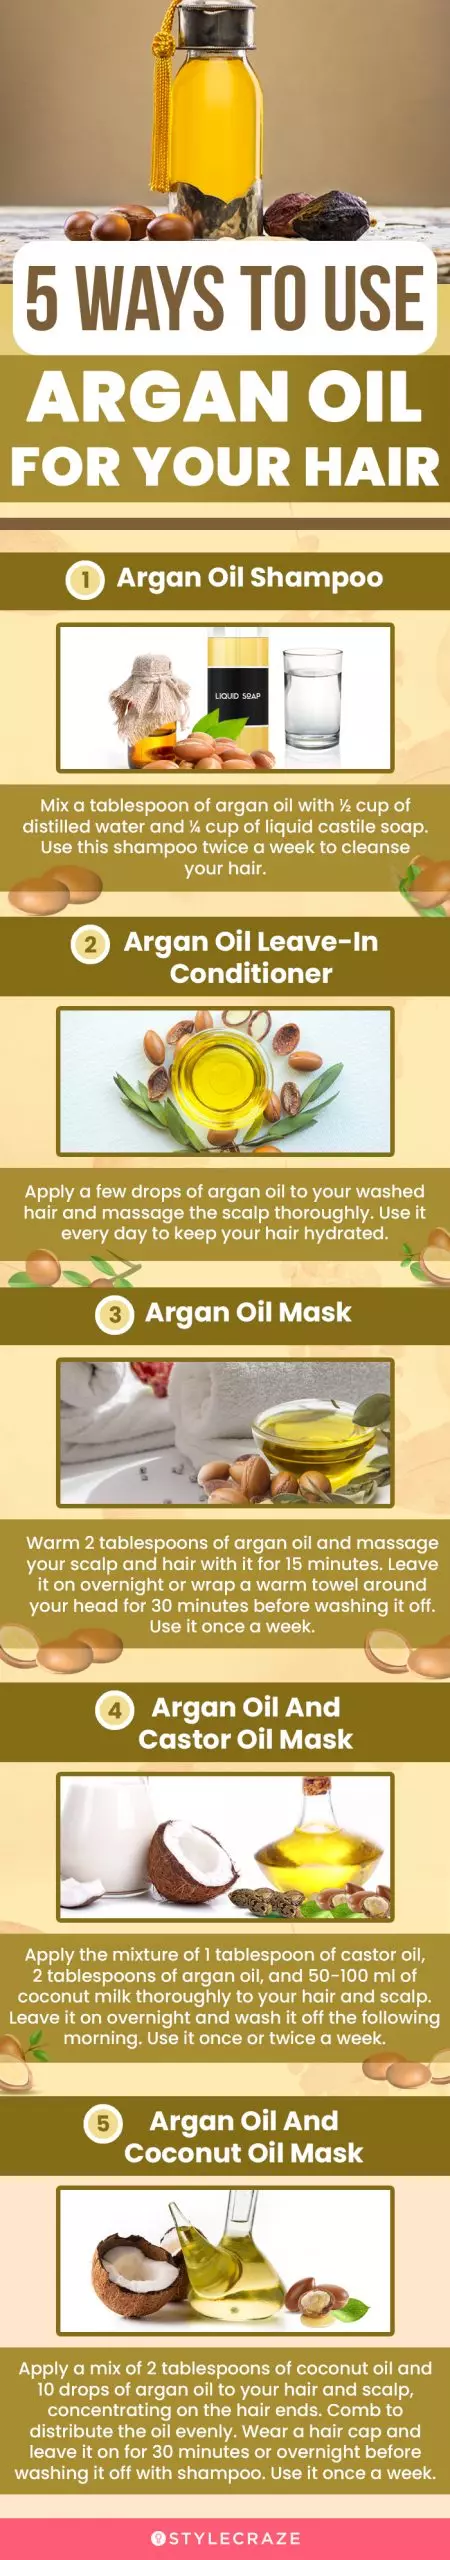 5 ways to use argan oil for hair (infographic)